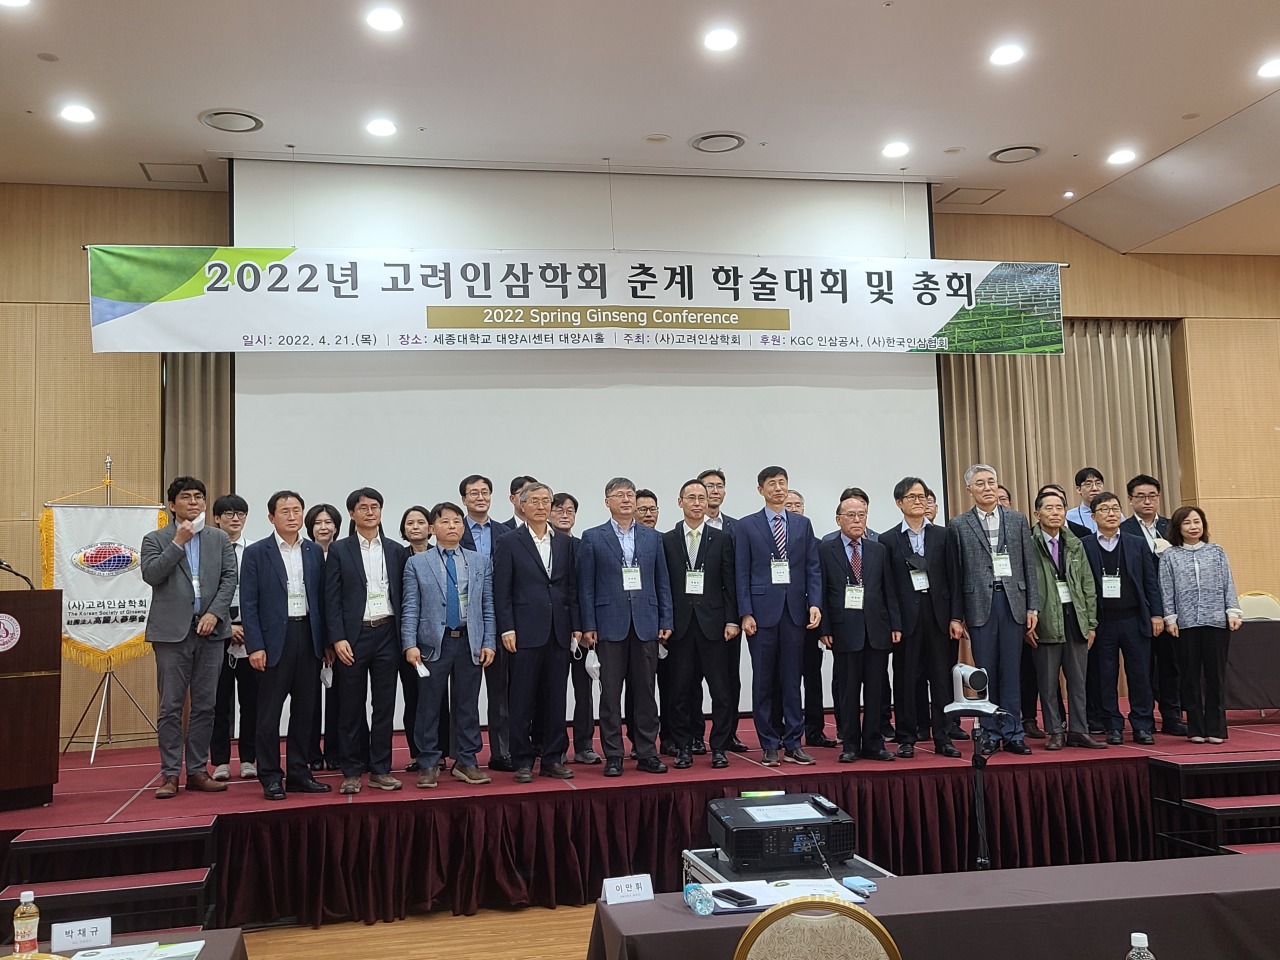 Participants of the 2022 Spring Ginseng Conference pose for a picture. (KT&G)